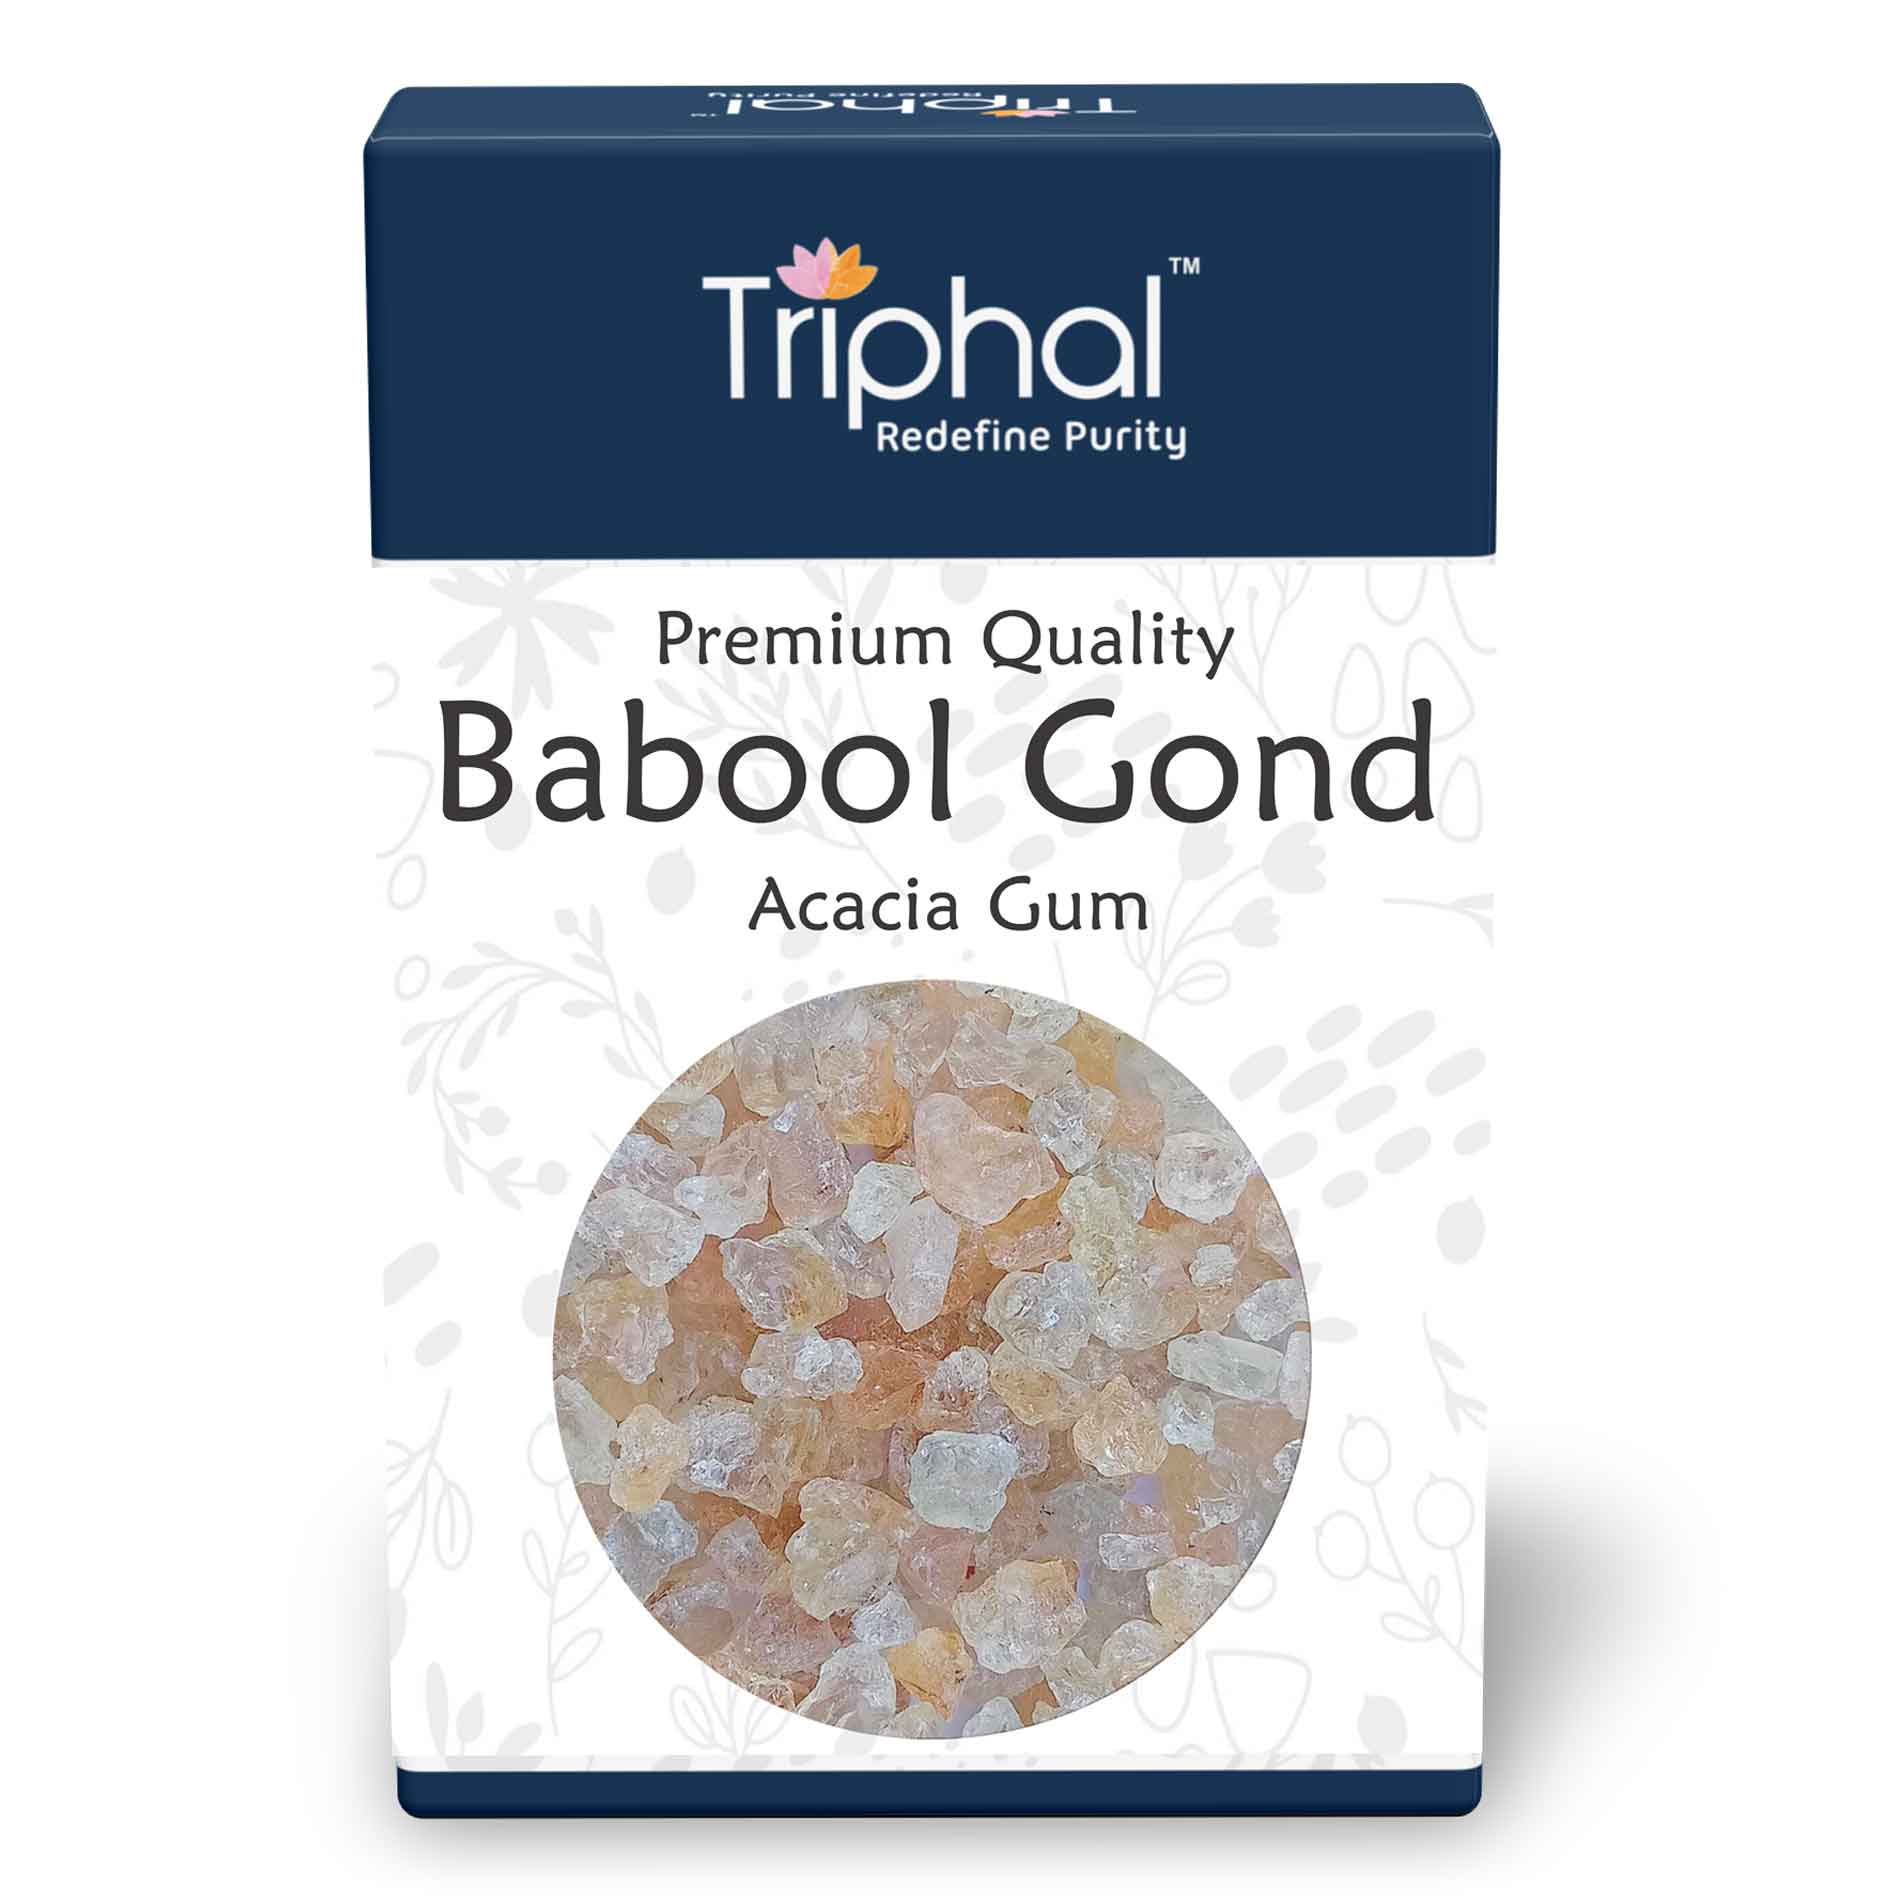 Triphal Babool Gond: All-natural food stabilizer and emulsifier.